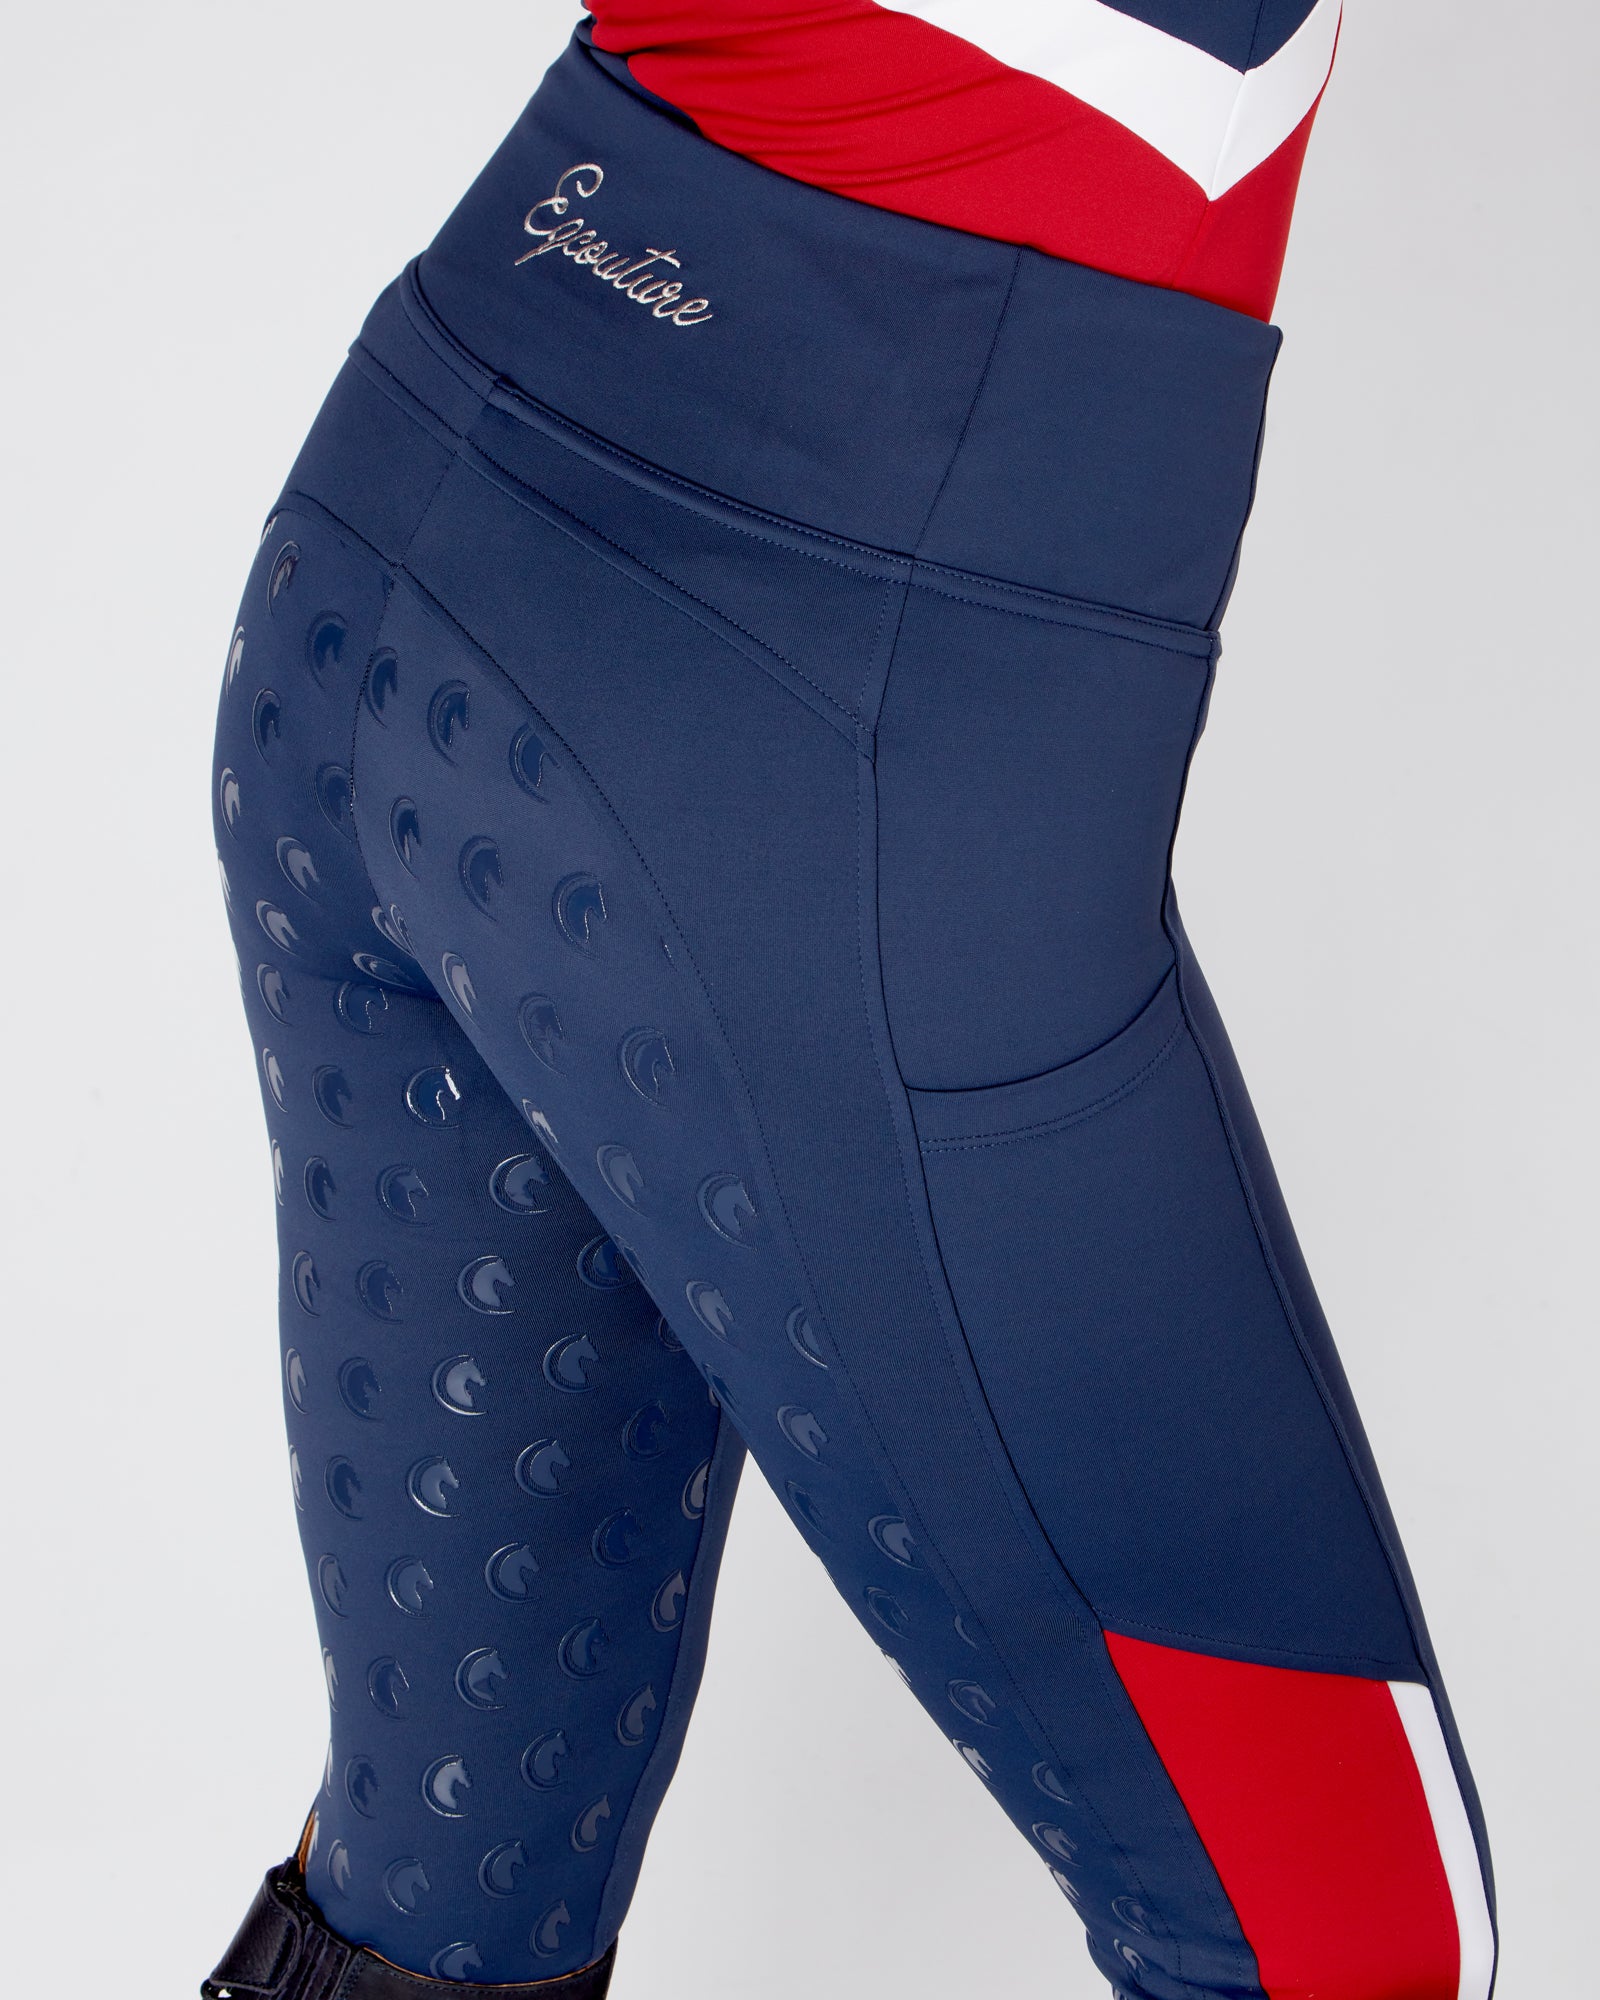 Tommy Hilfiger Womens Size S Blue / Red / White Leggings (s)